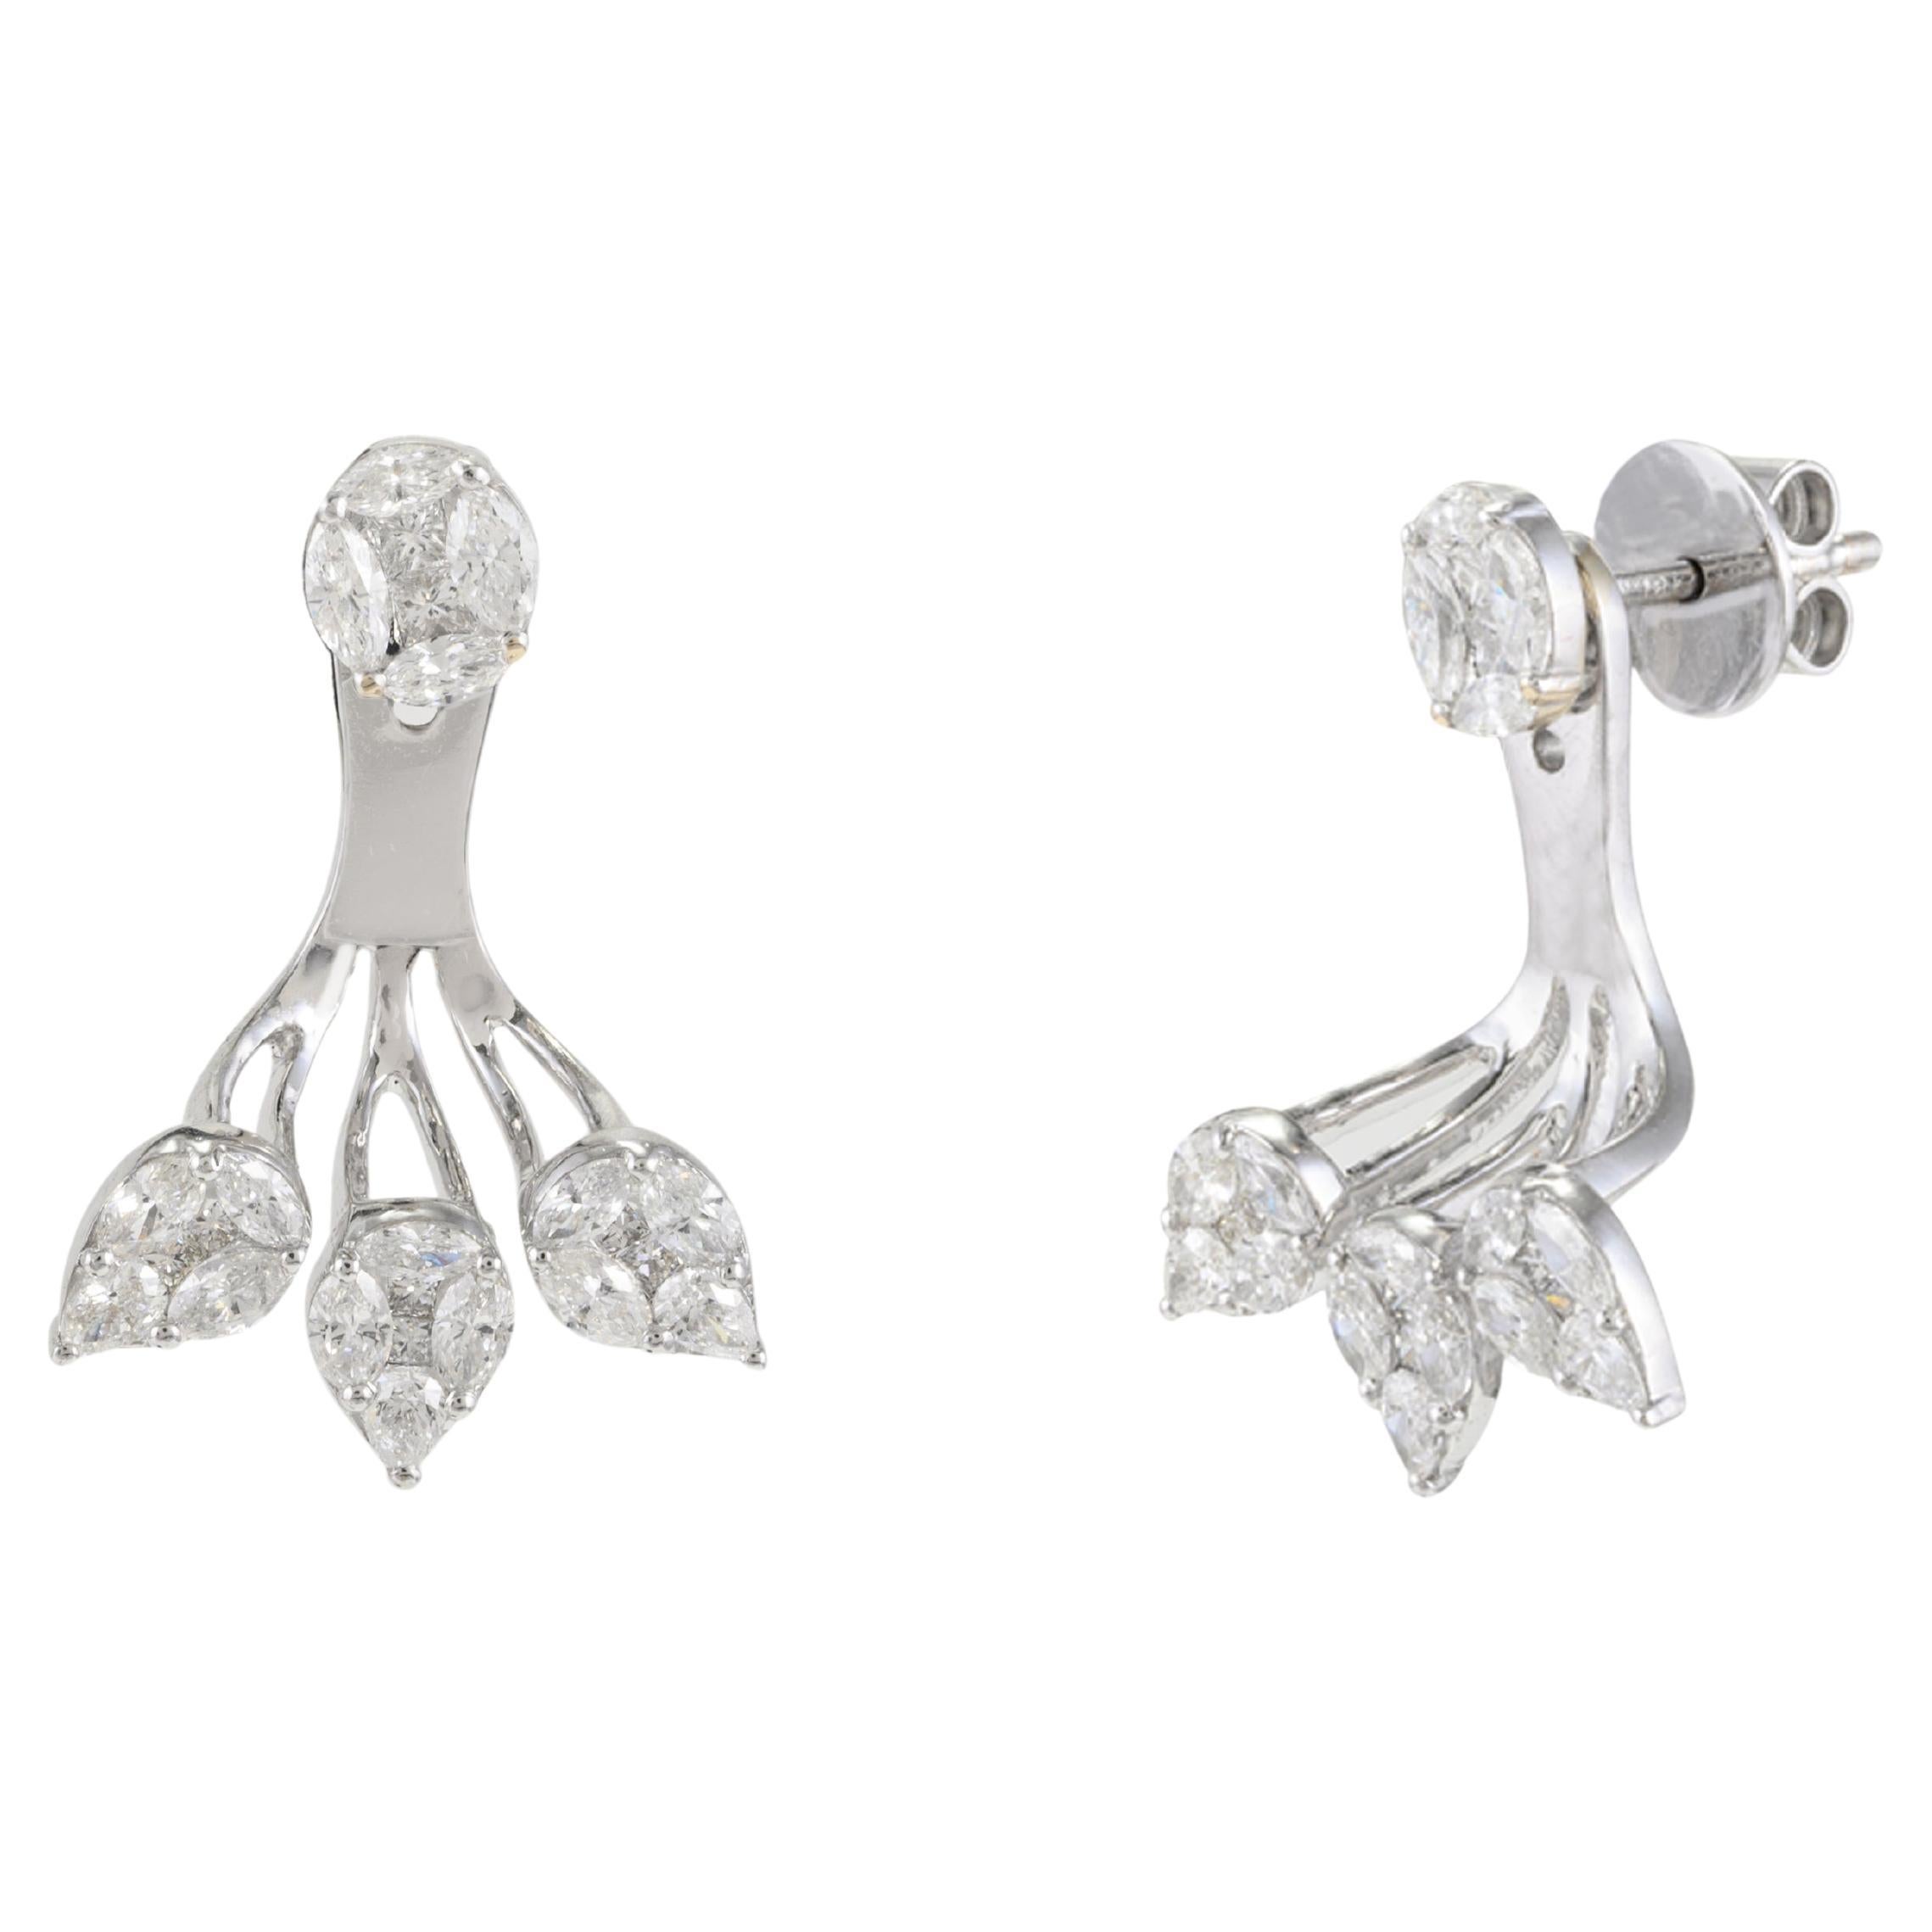 Unique 1.34 Carat Natural Diamond Ear Jacket Earrings in 18K Solid White Gold